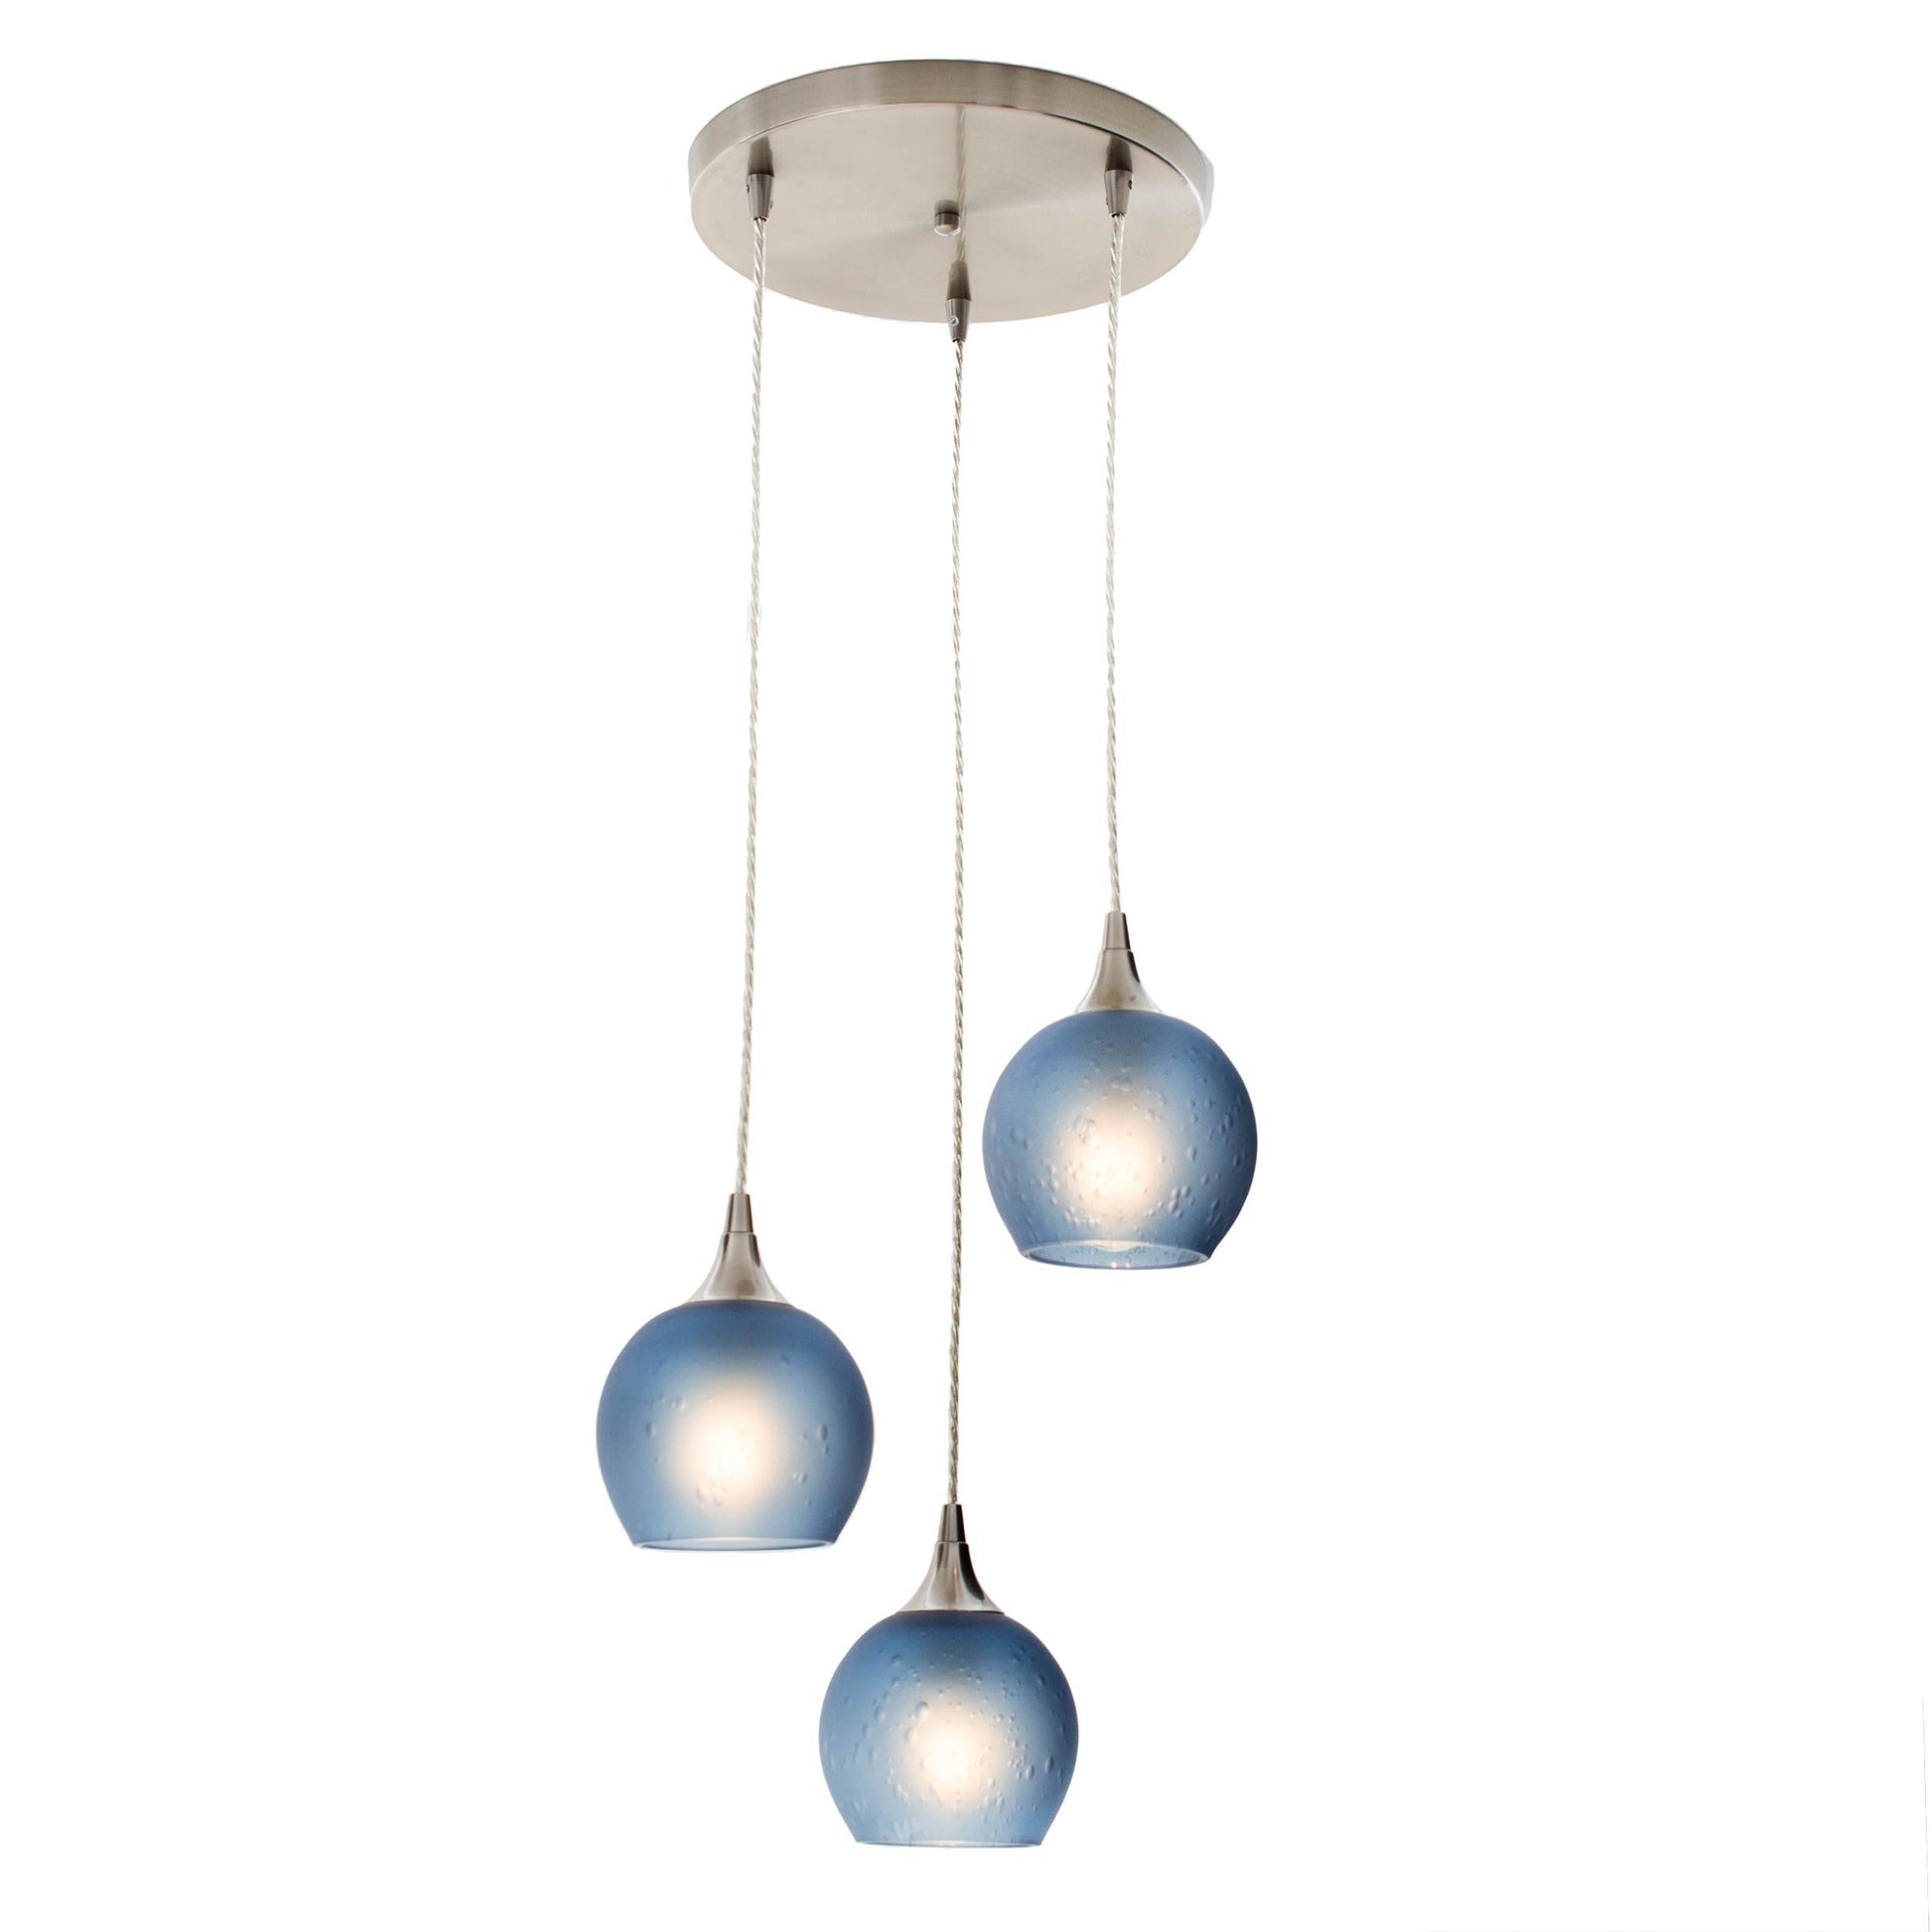 Bicycle Glass Co. 763 Celestial 3 Pendant Cascade Chandelier in Steel Blue with Brushed Nickel Hardware